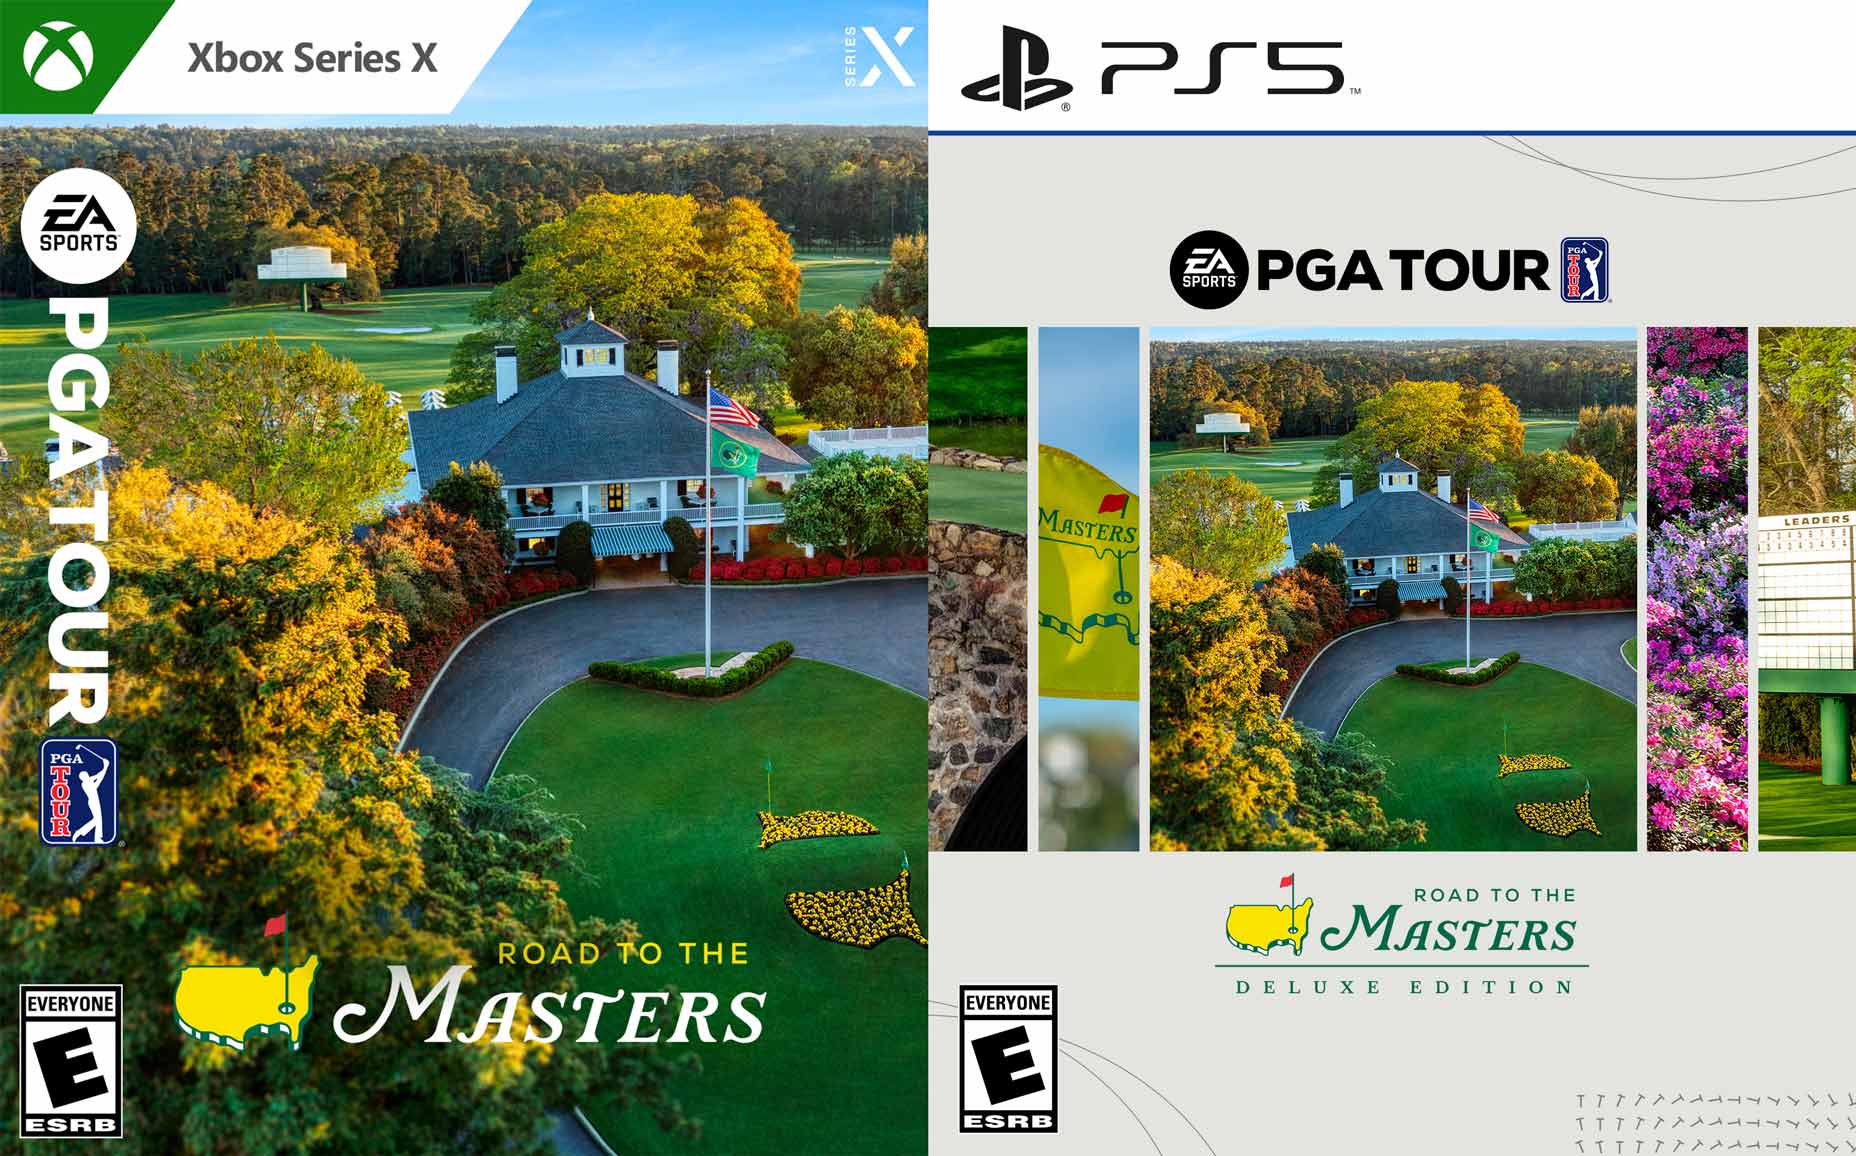 The covers of EA Sports PGA Tour standard (L) and deluxe editions.